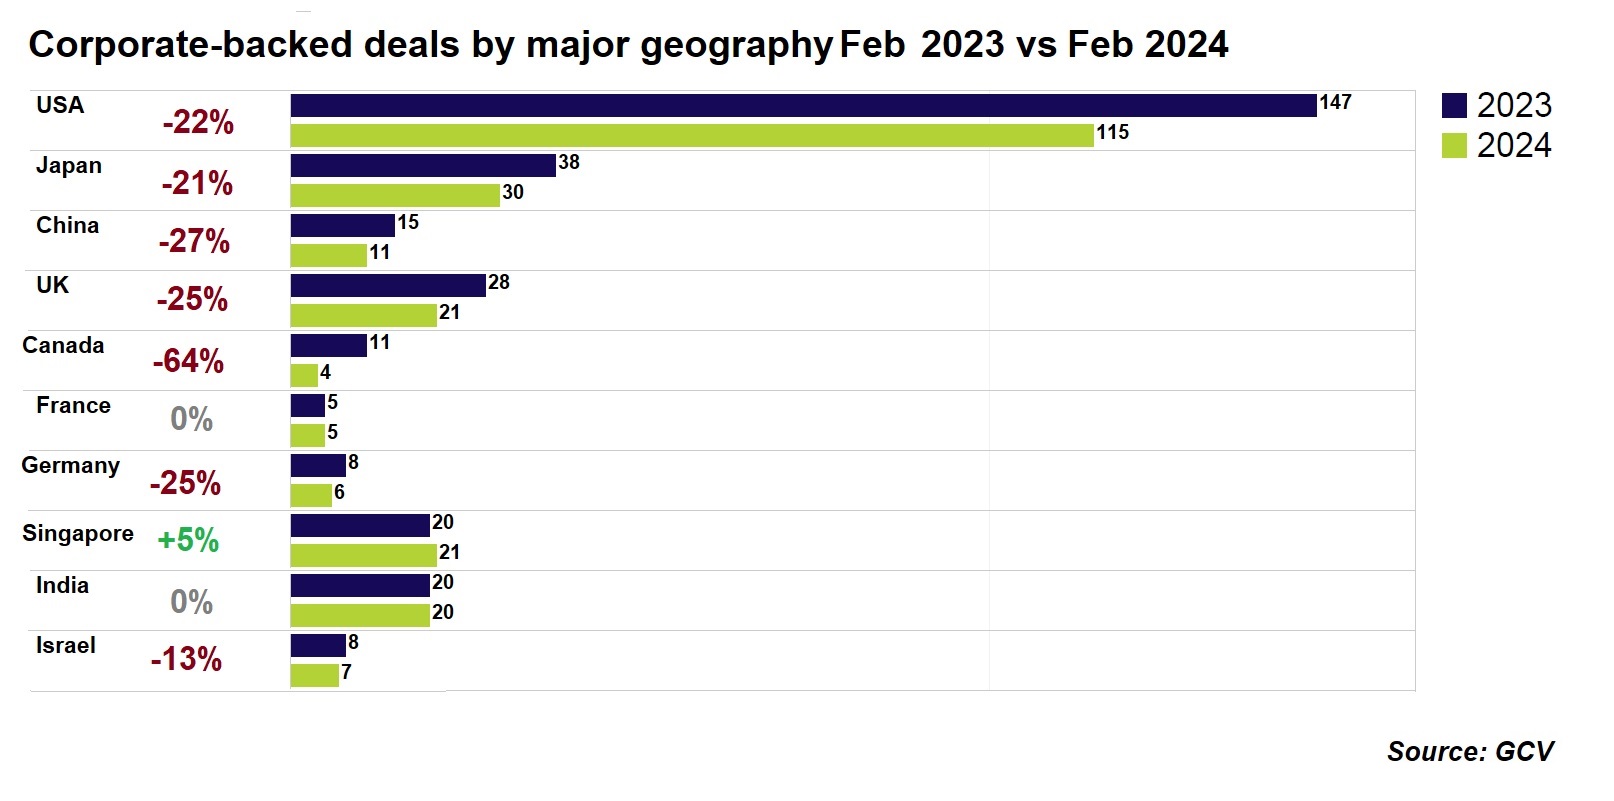 Horizontal bar chart showing corporates-backed rounds by major geography February 2023 vs February 2024. Source: GCV